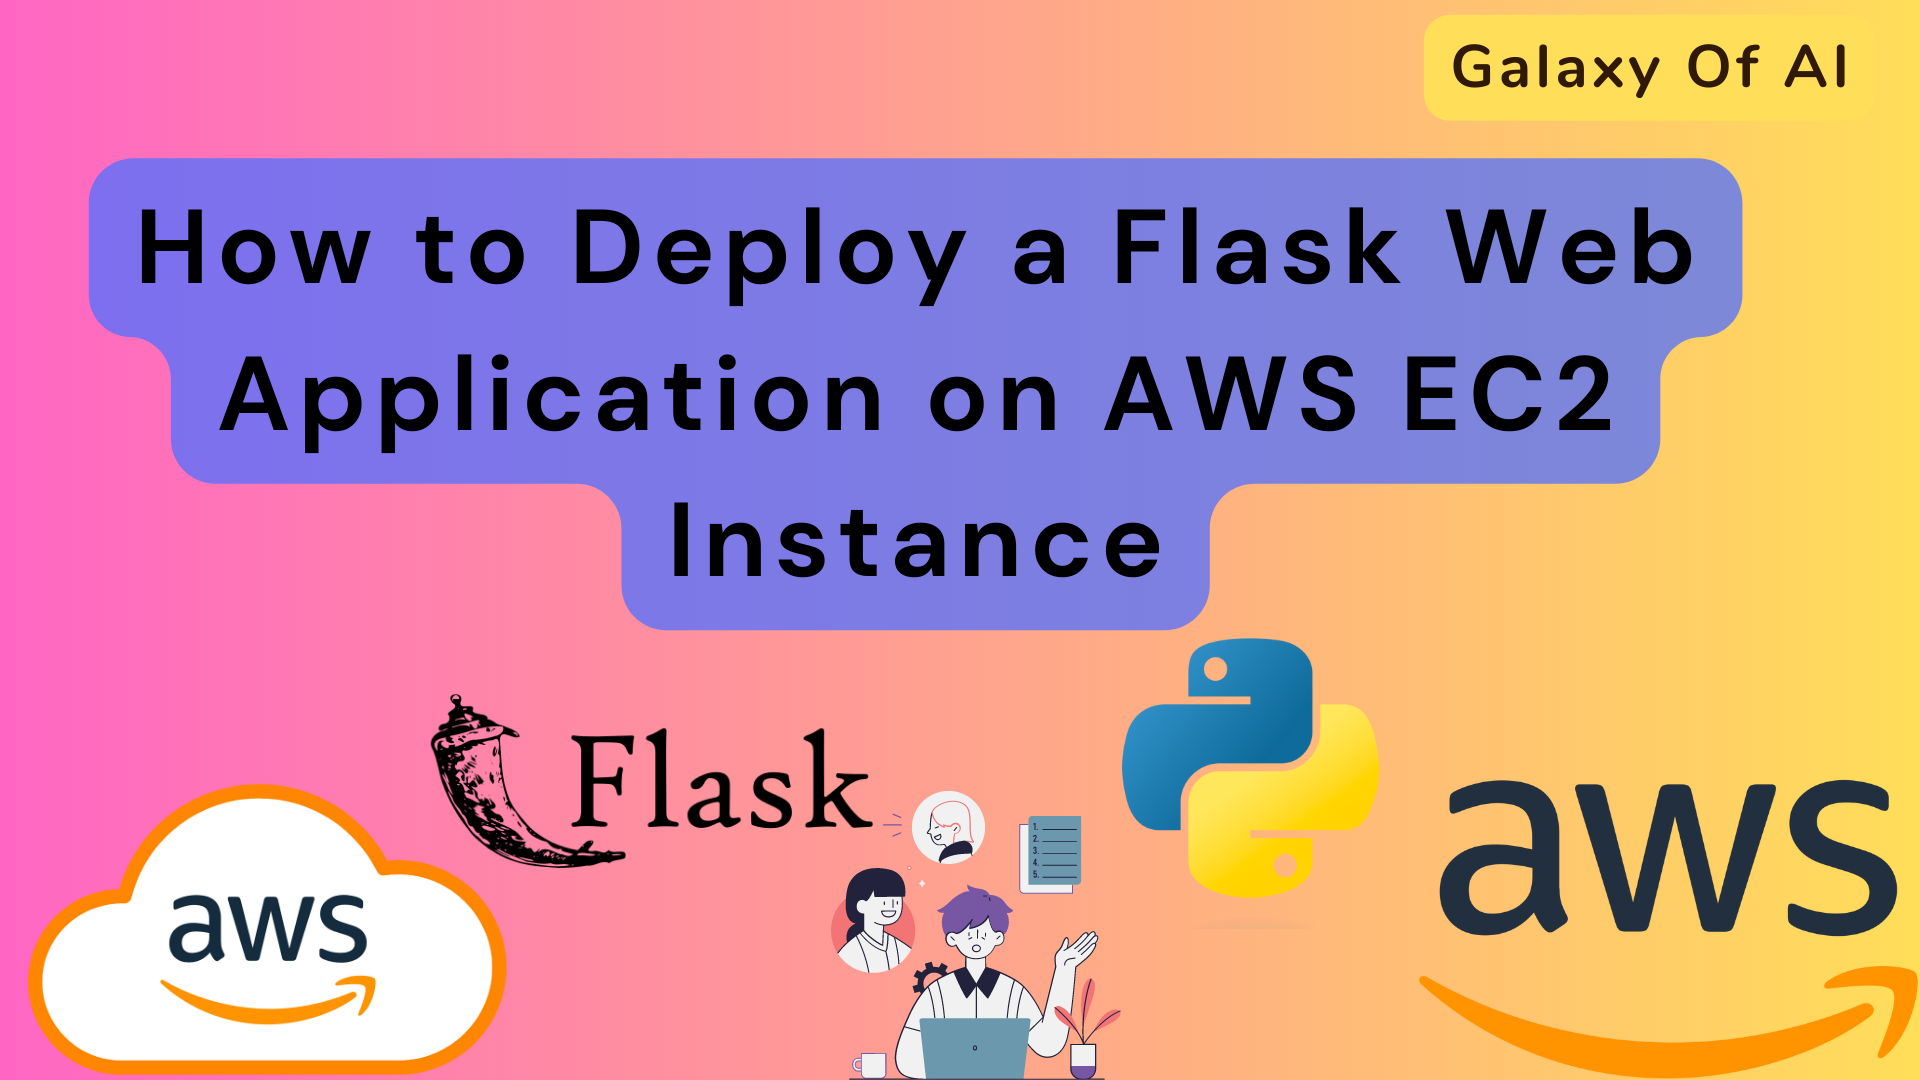 How to Deploy a Flask Web Application on AWS EC2 Instance